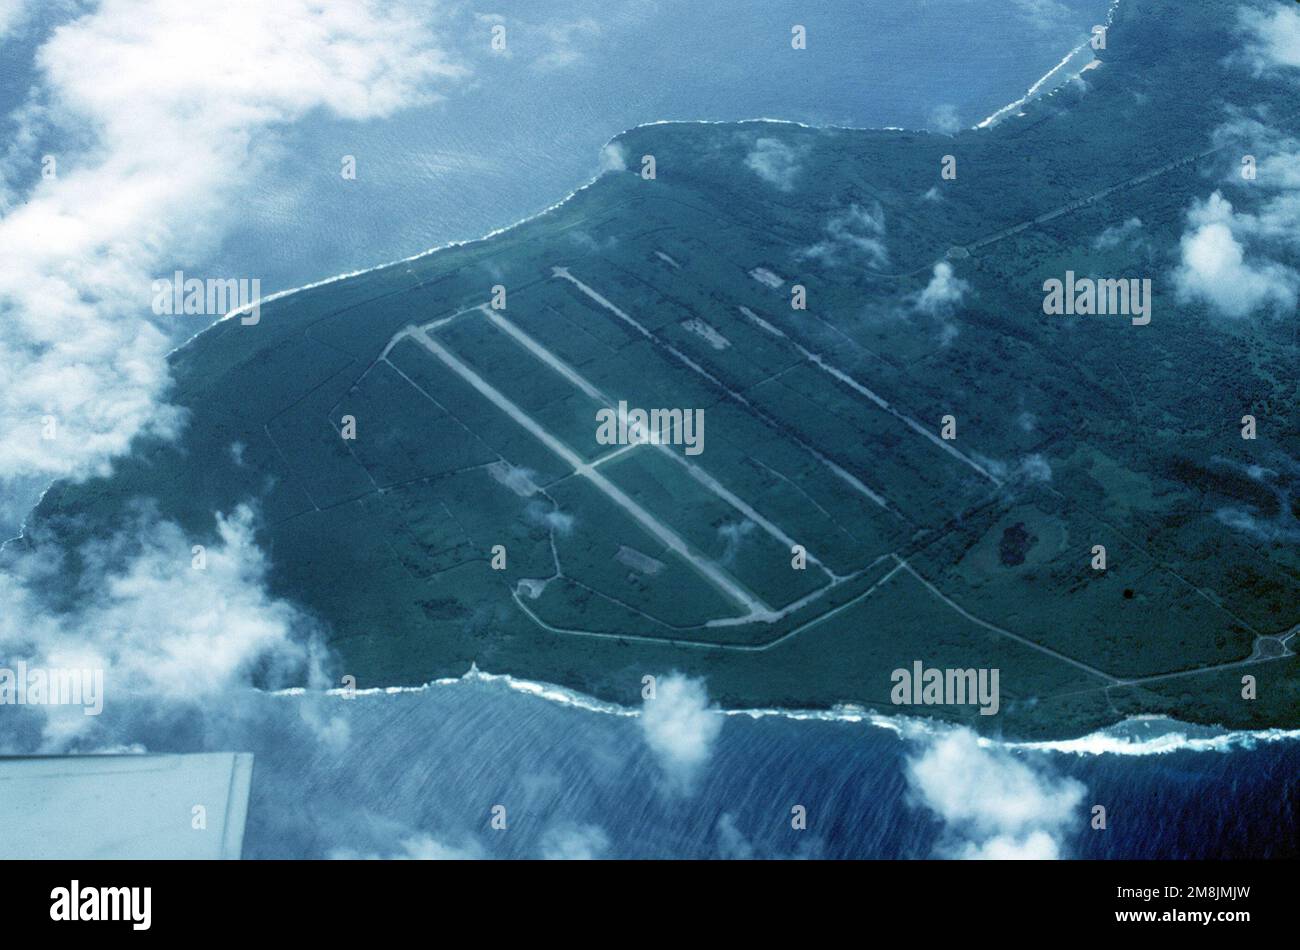 An aerial view of the USAAF North Field on Tinian Island. It was from here in World War Two that B-29 bombers flew long range missions against mainland Japan. Both the missions to Hiroshima and Nagasaki originated from this airstrip nearly half a century ago. Base: Tinian Island Country: Northern Mariana Islands (MNP) Stock Photo